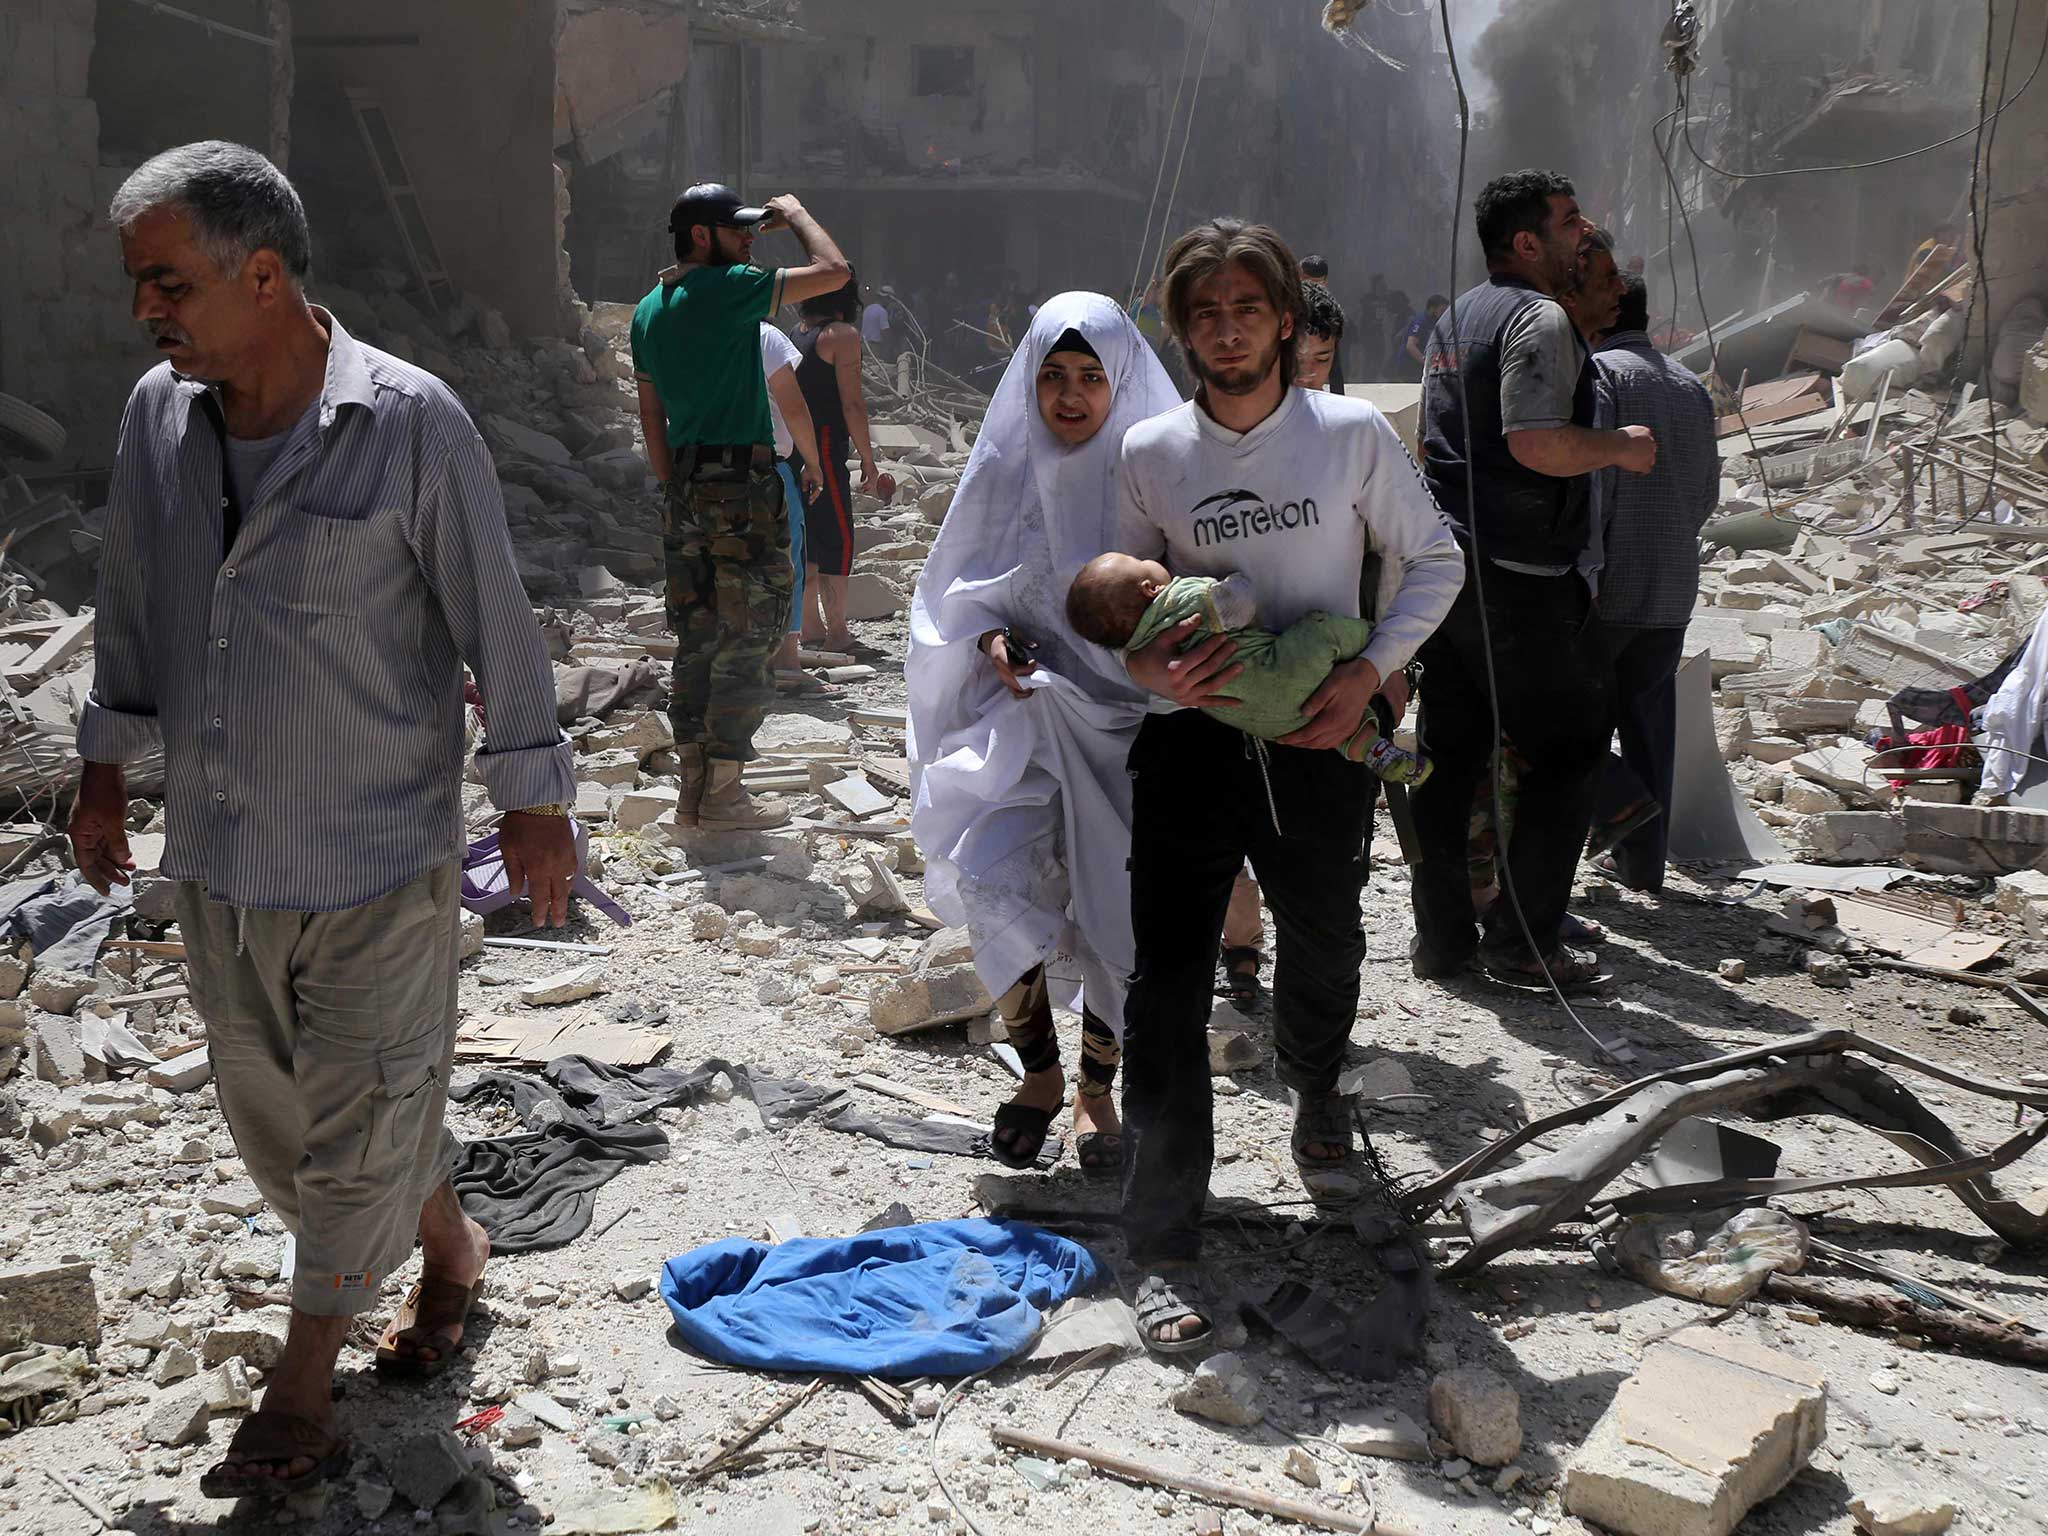 A Syrian family walks amid the rubble of destroyed buildings following a reported air strike in the Bustan al-Qasr rebel-held district of the northern Syrian city of Aleppo